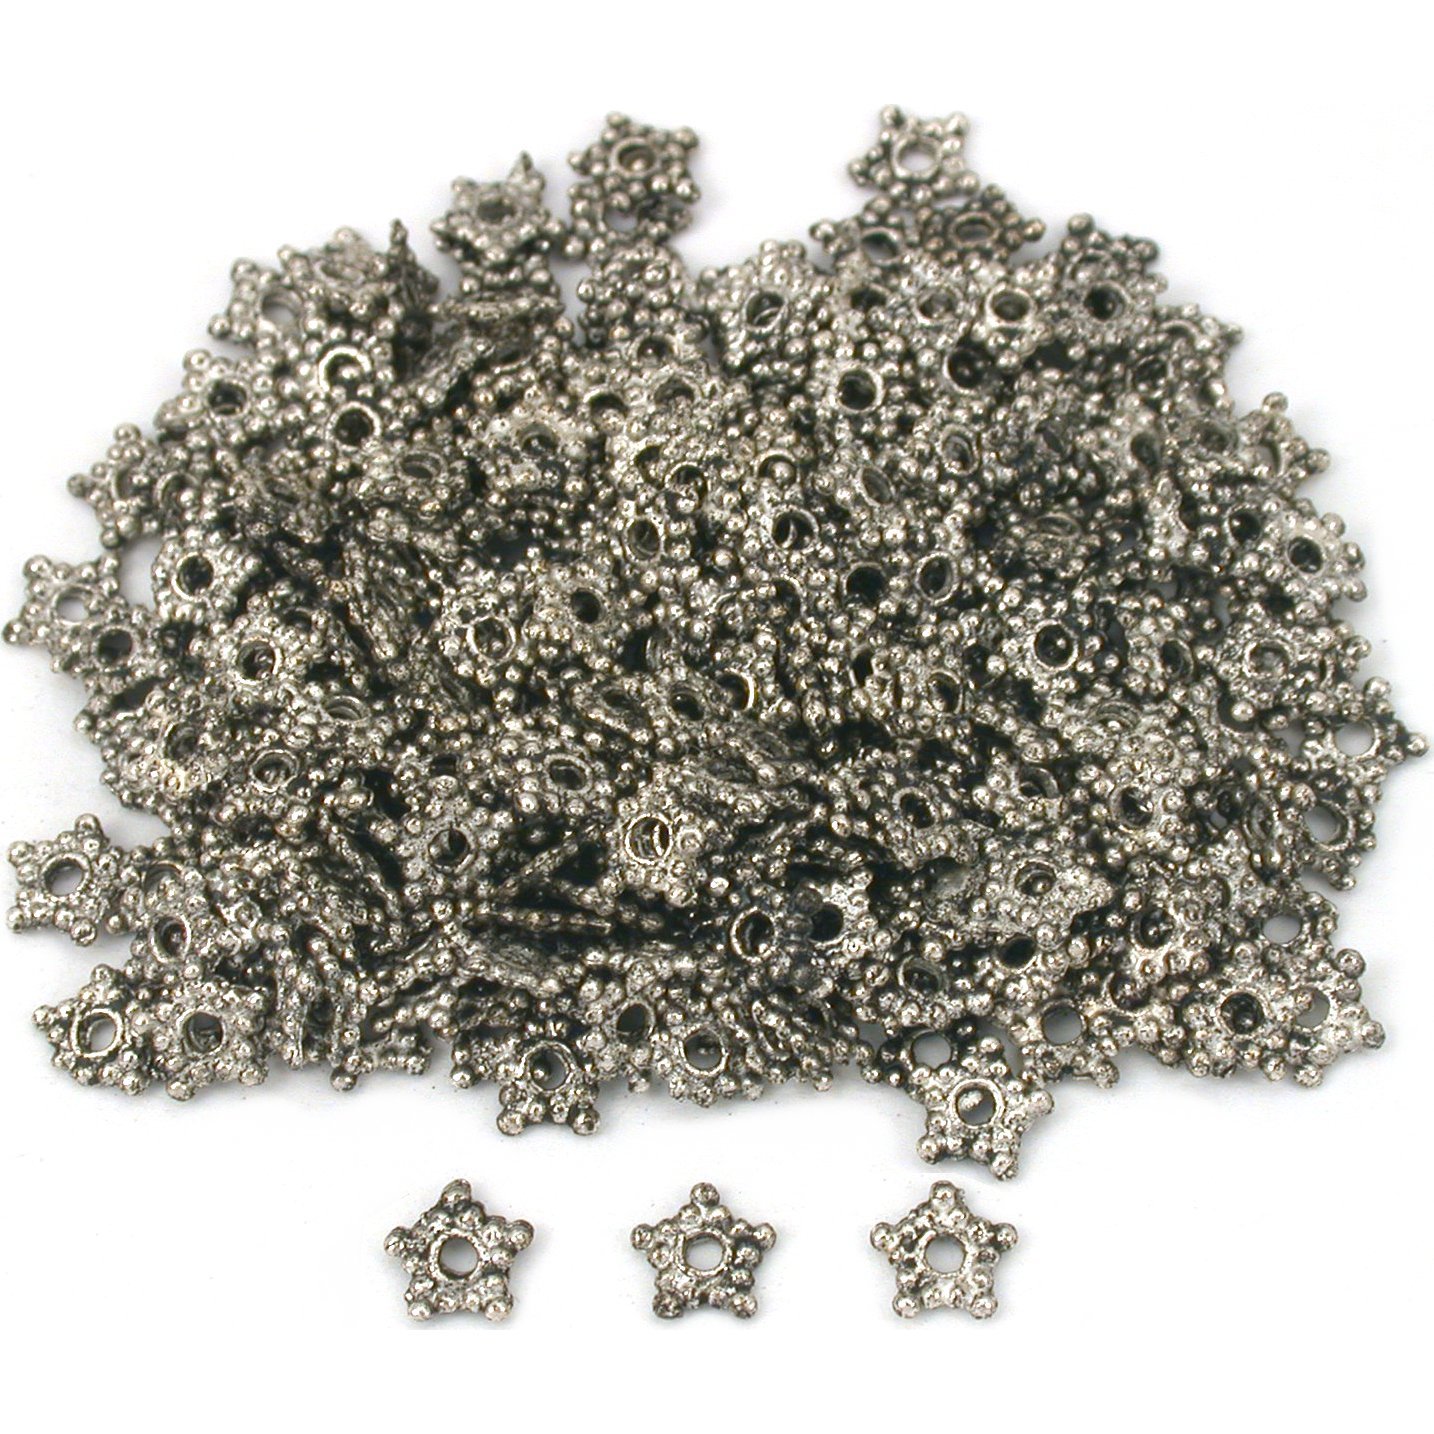 Primary image for Bali Spacer Star Beads Antique Silver Plated 5mm 290Pcs Approx.